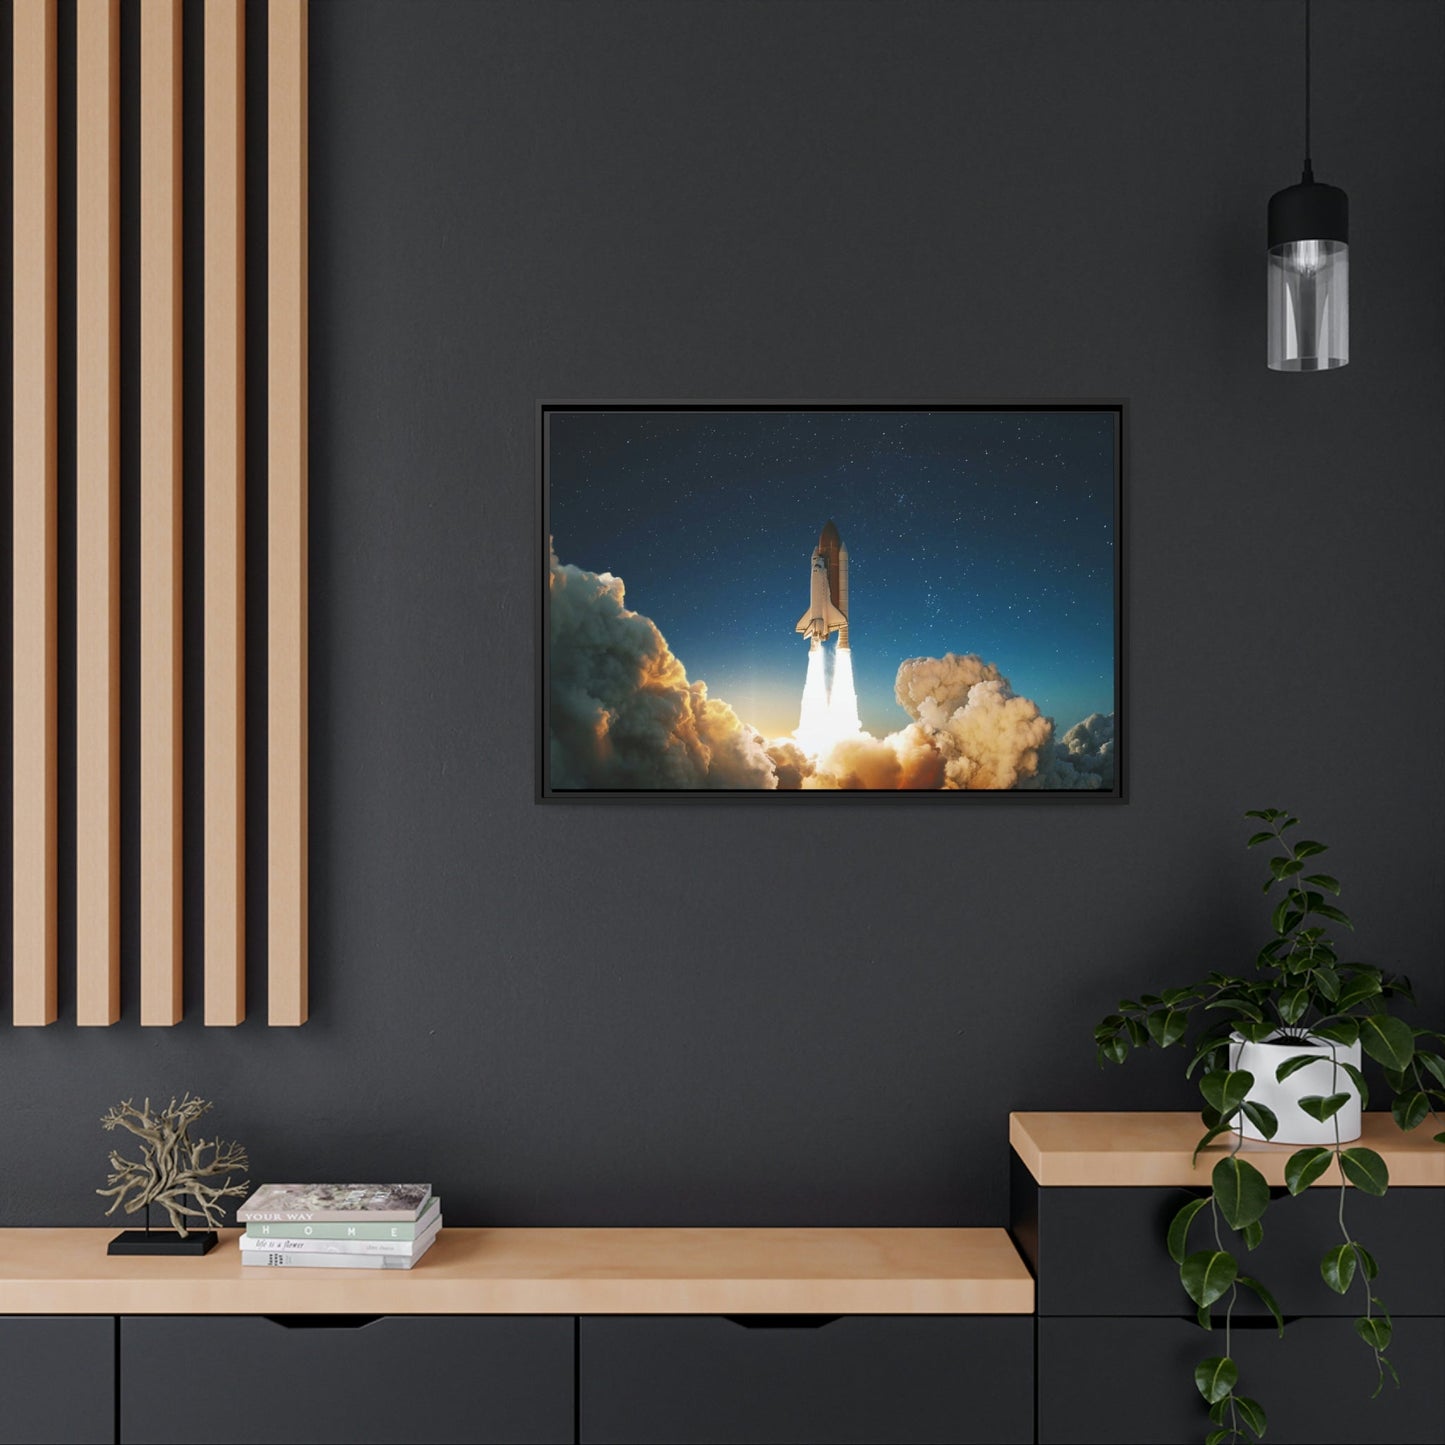 Beyond the Stratosphere: NASA-Themed Canvas